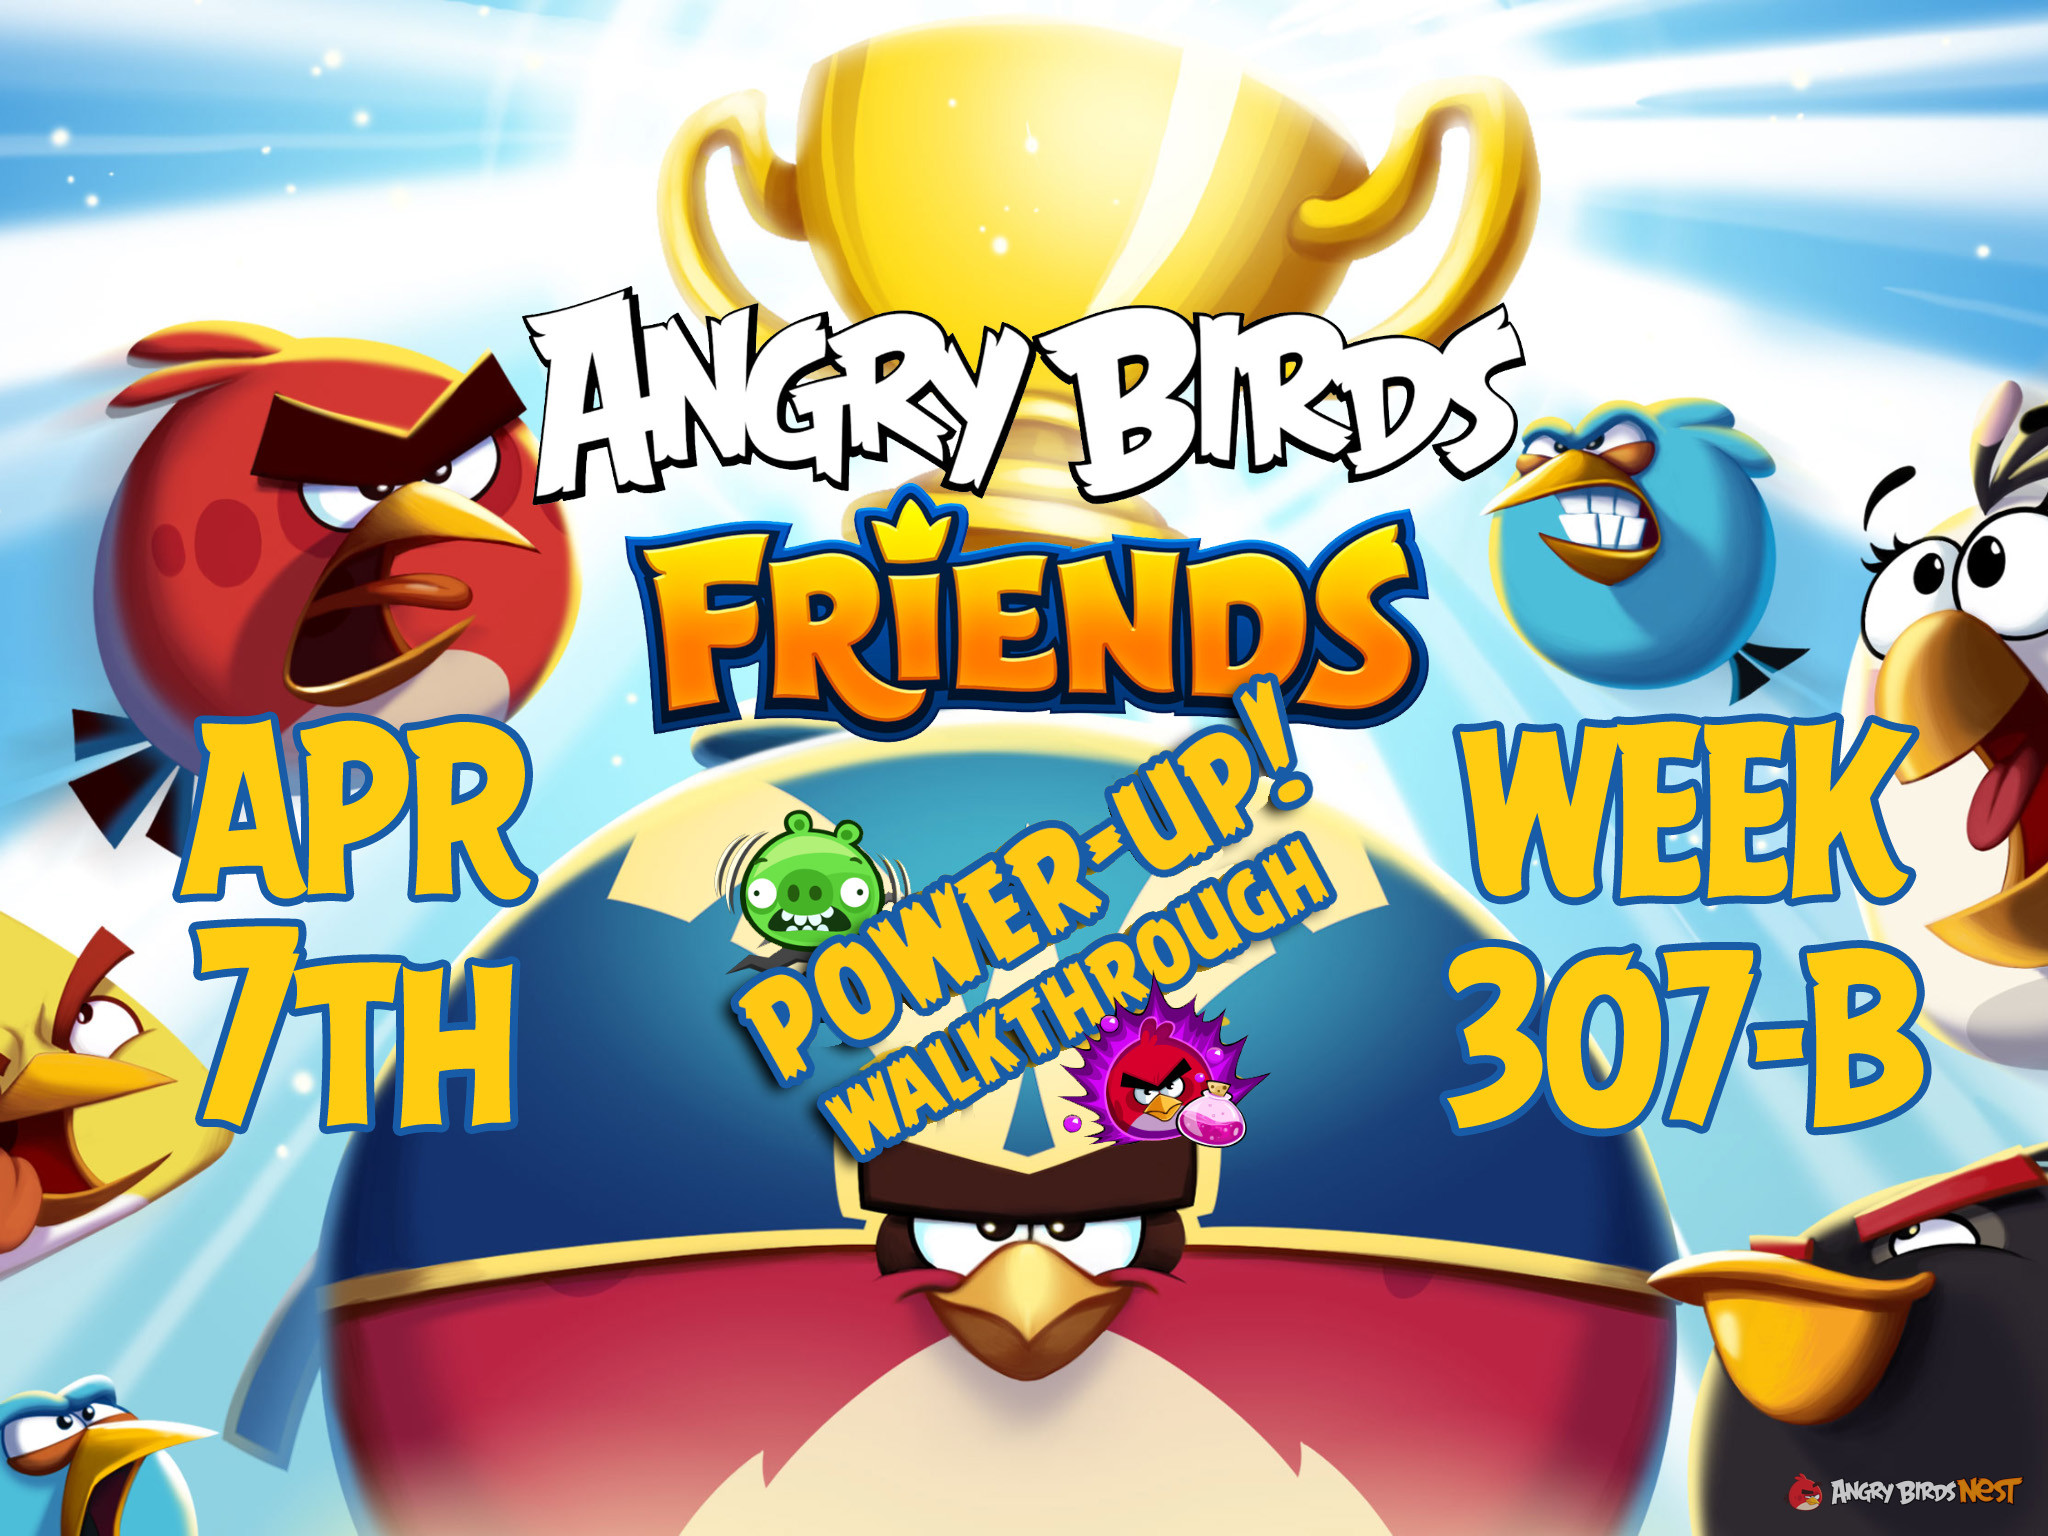 Angry Birds Friends Tournament Week 307-B Feature Image PU